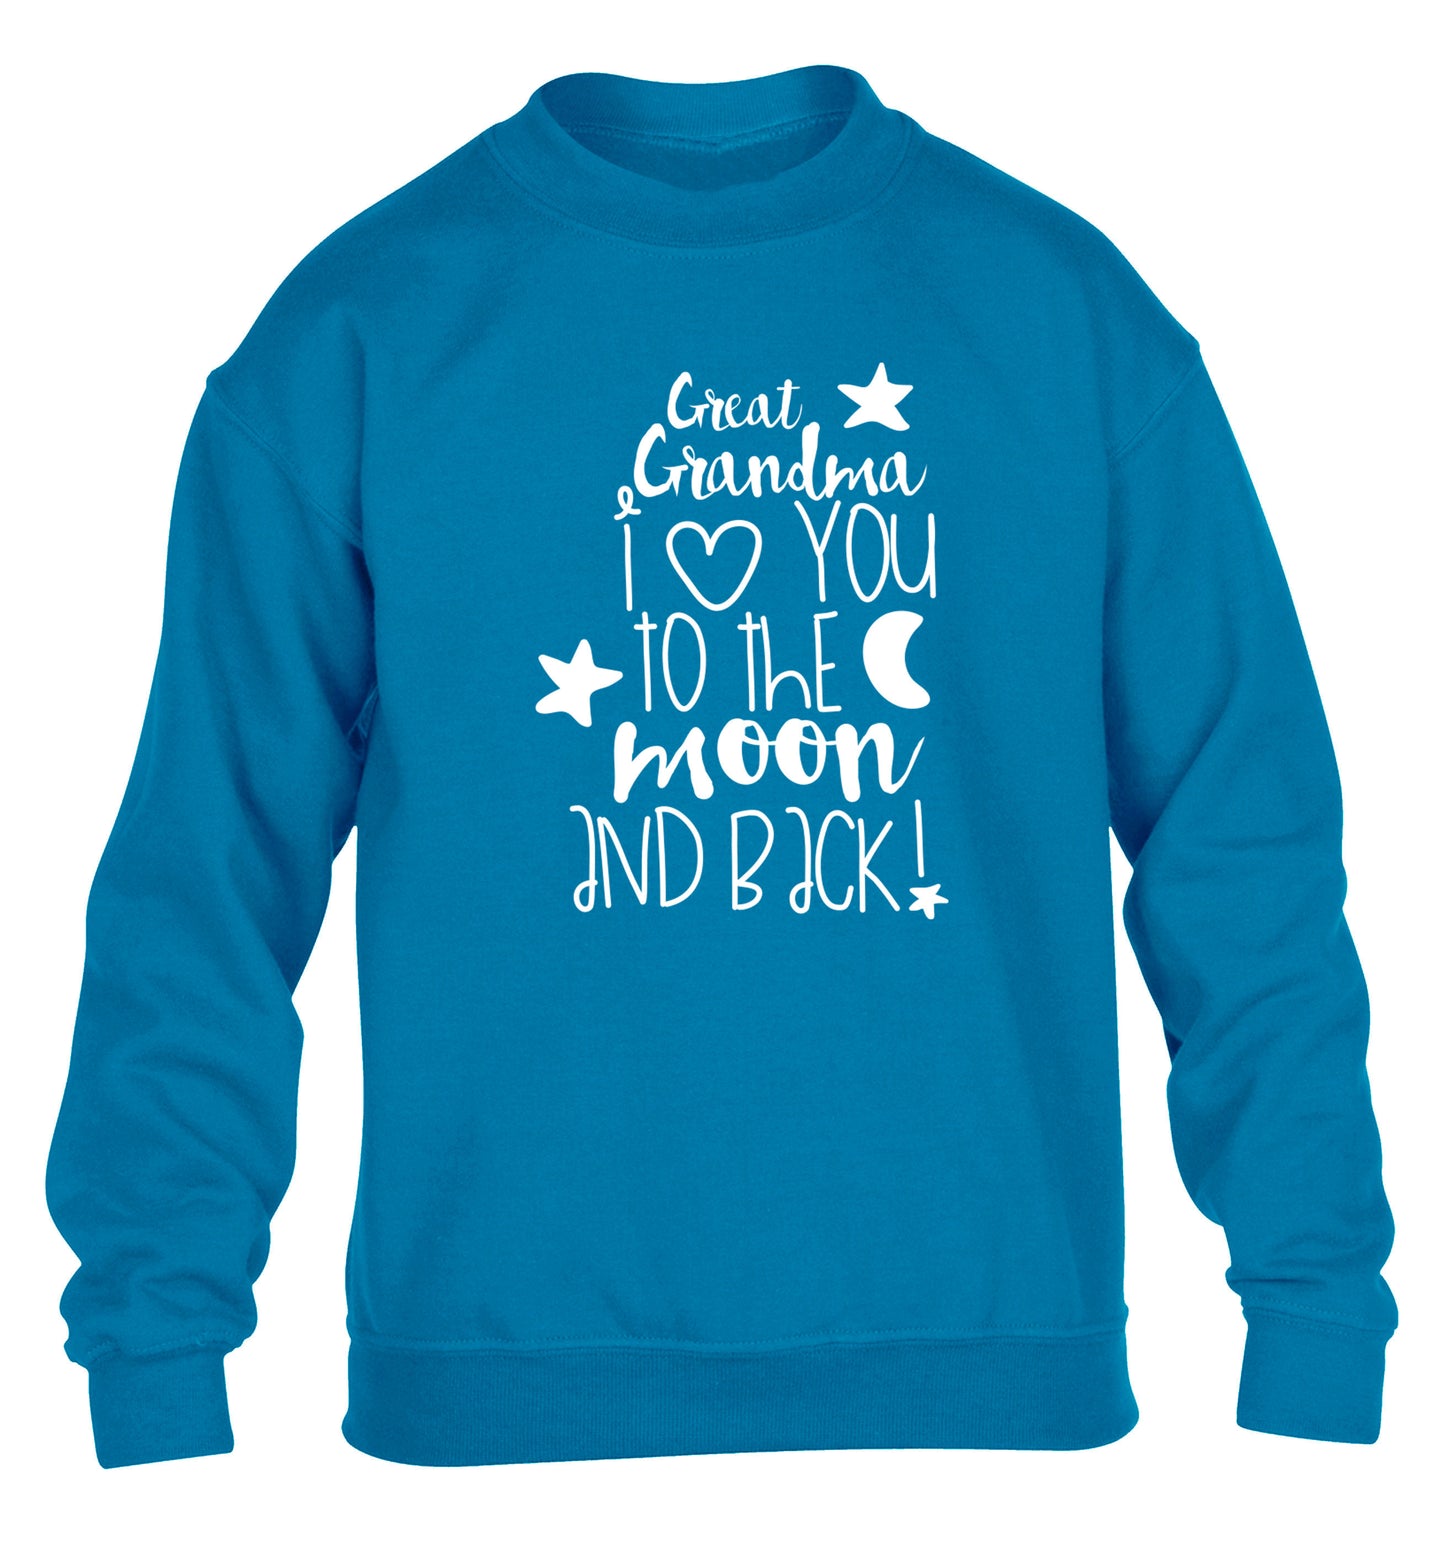 Great Grandma I love you to the moon and back children's blue  sweater 12-14 Years